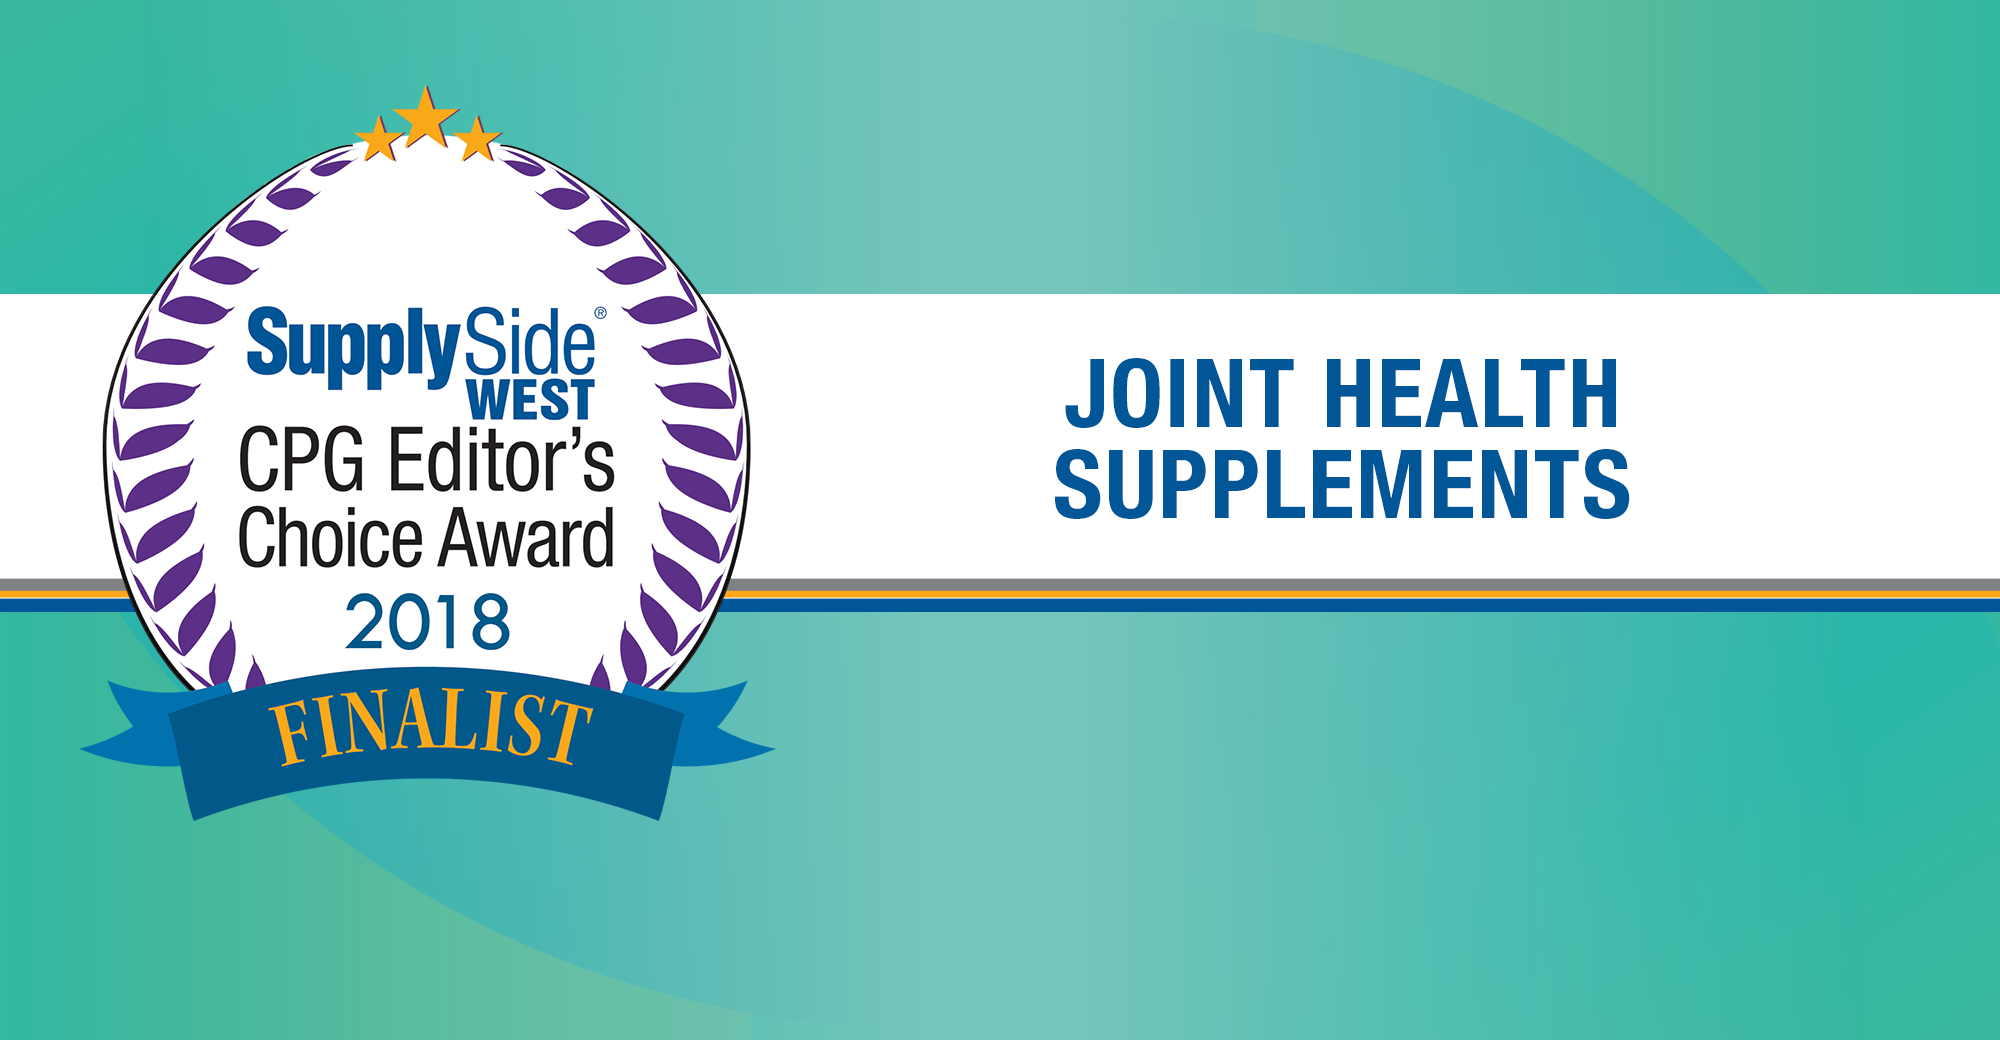 Joint health finalists for 2018 SupplySide CPG Editor’s Choice Award – image gallery